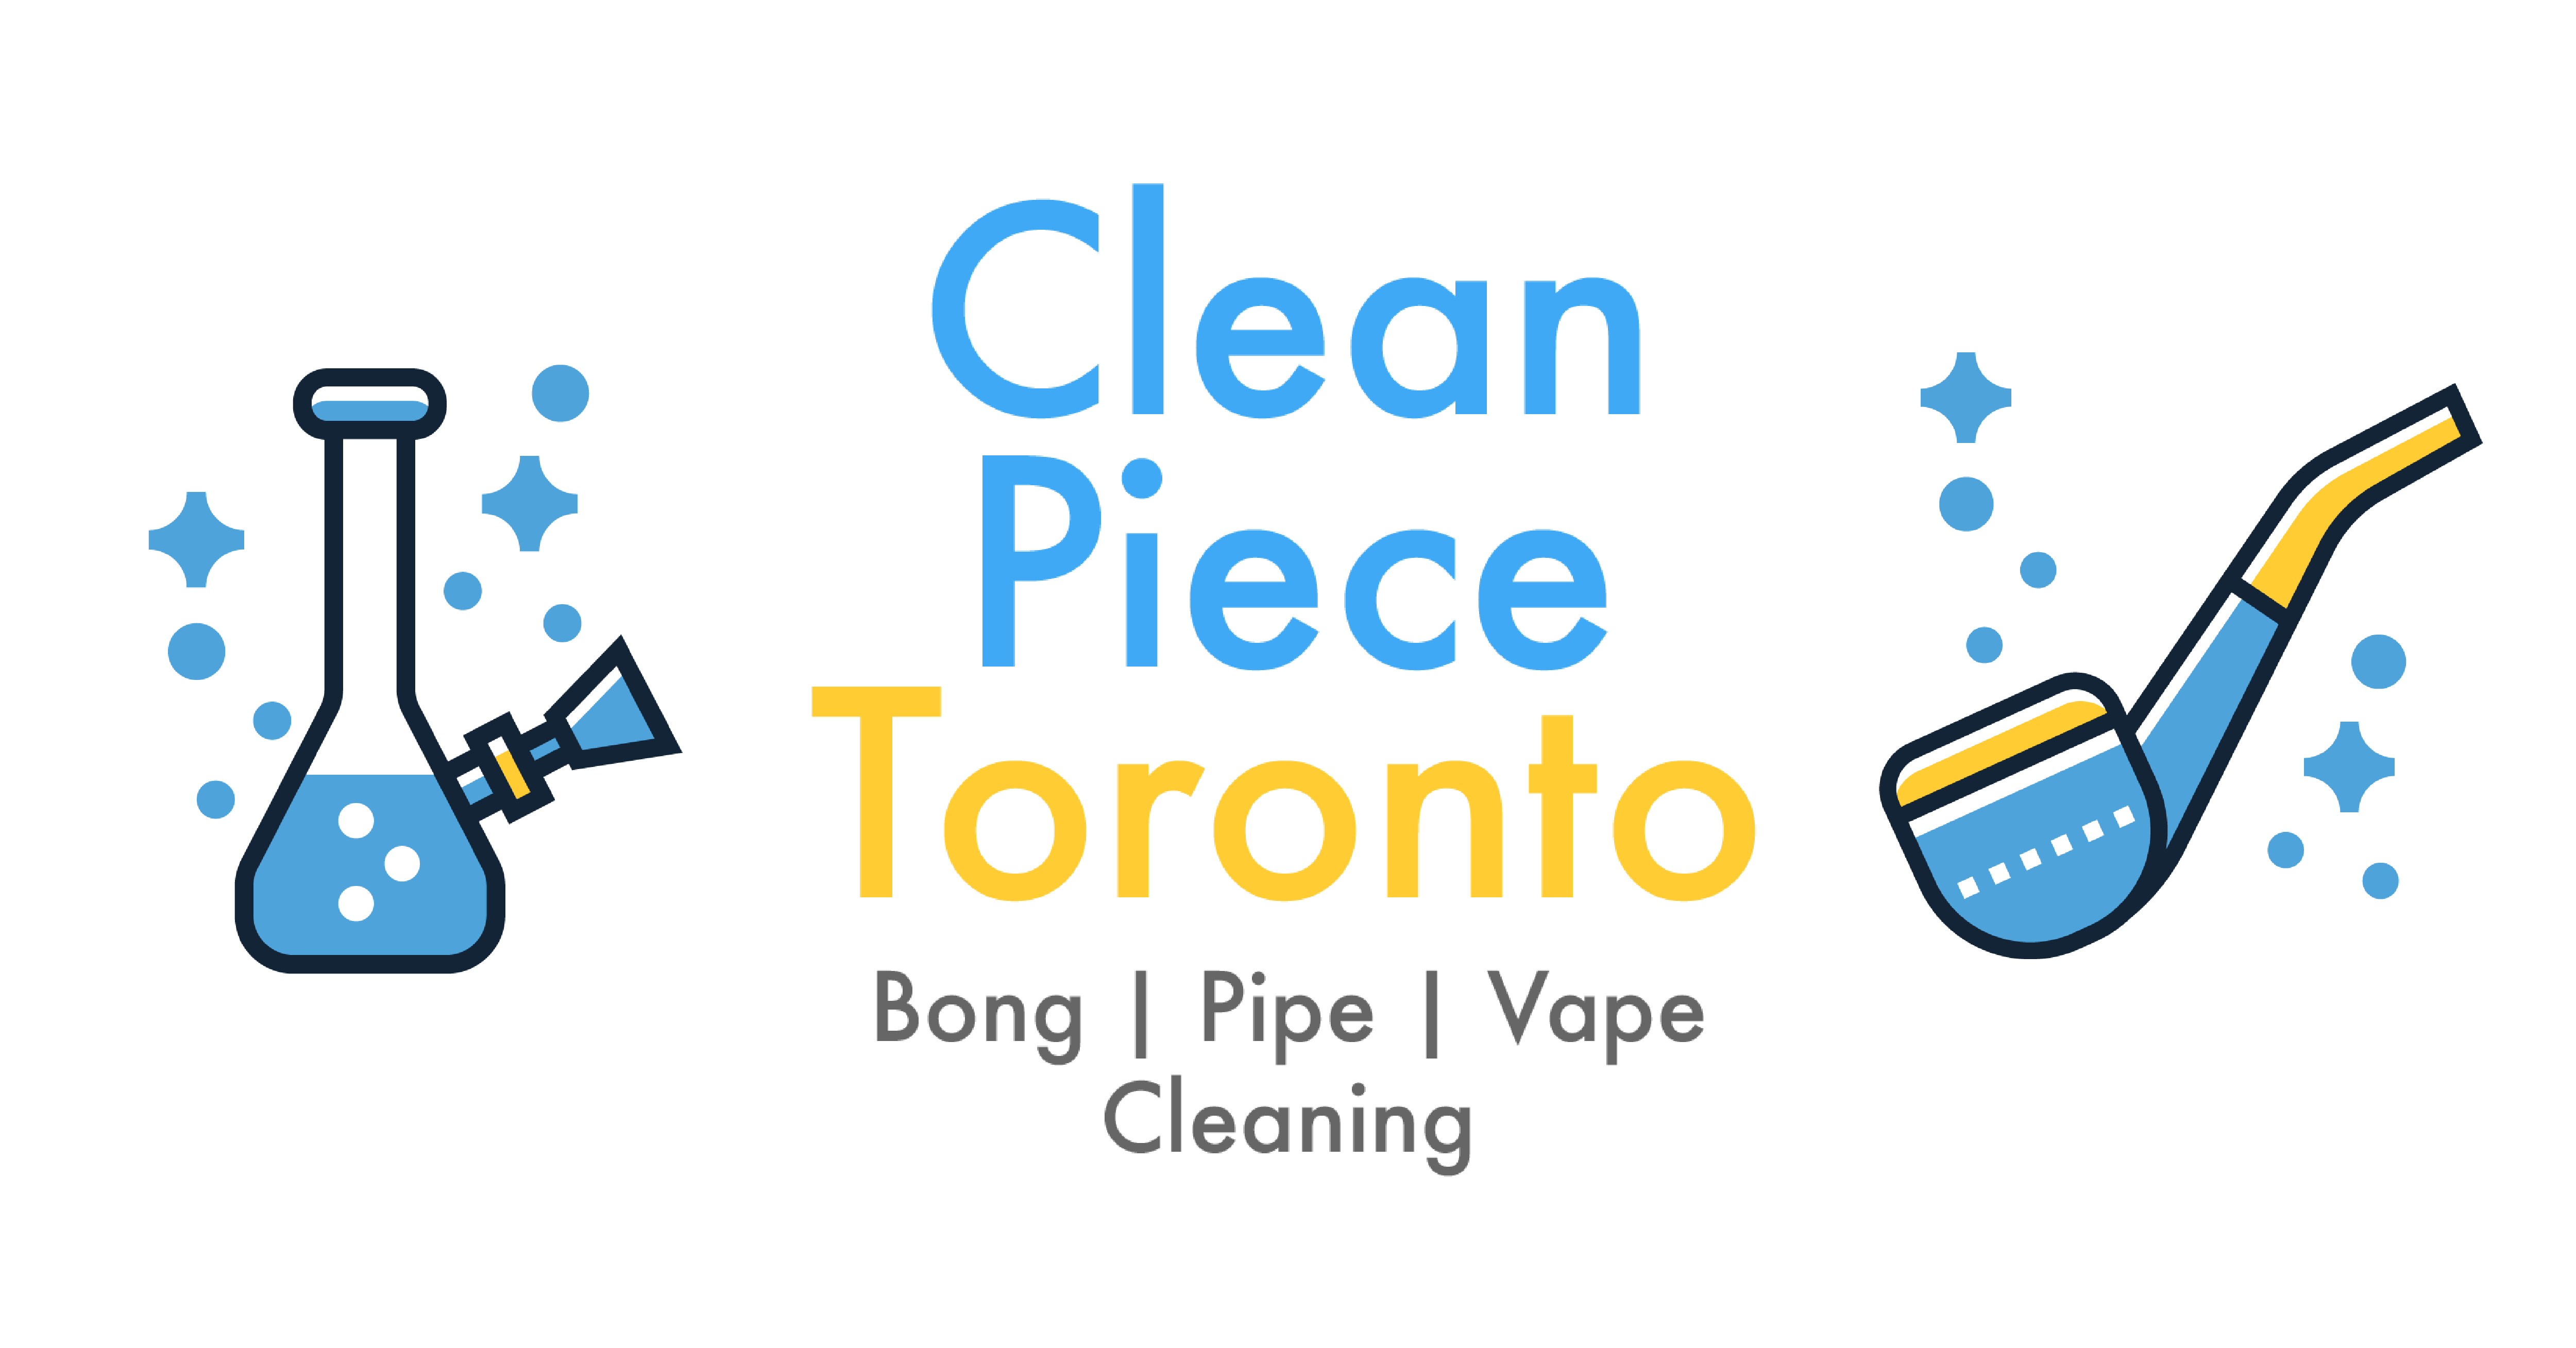 bong cleaning, Dirty Bong? Have your bong cleaned at Stok&#8217;d Cannabis in Scarborough.